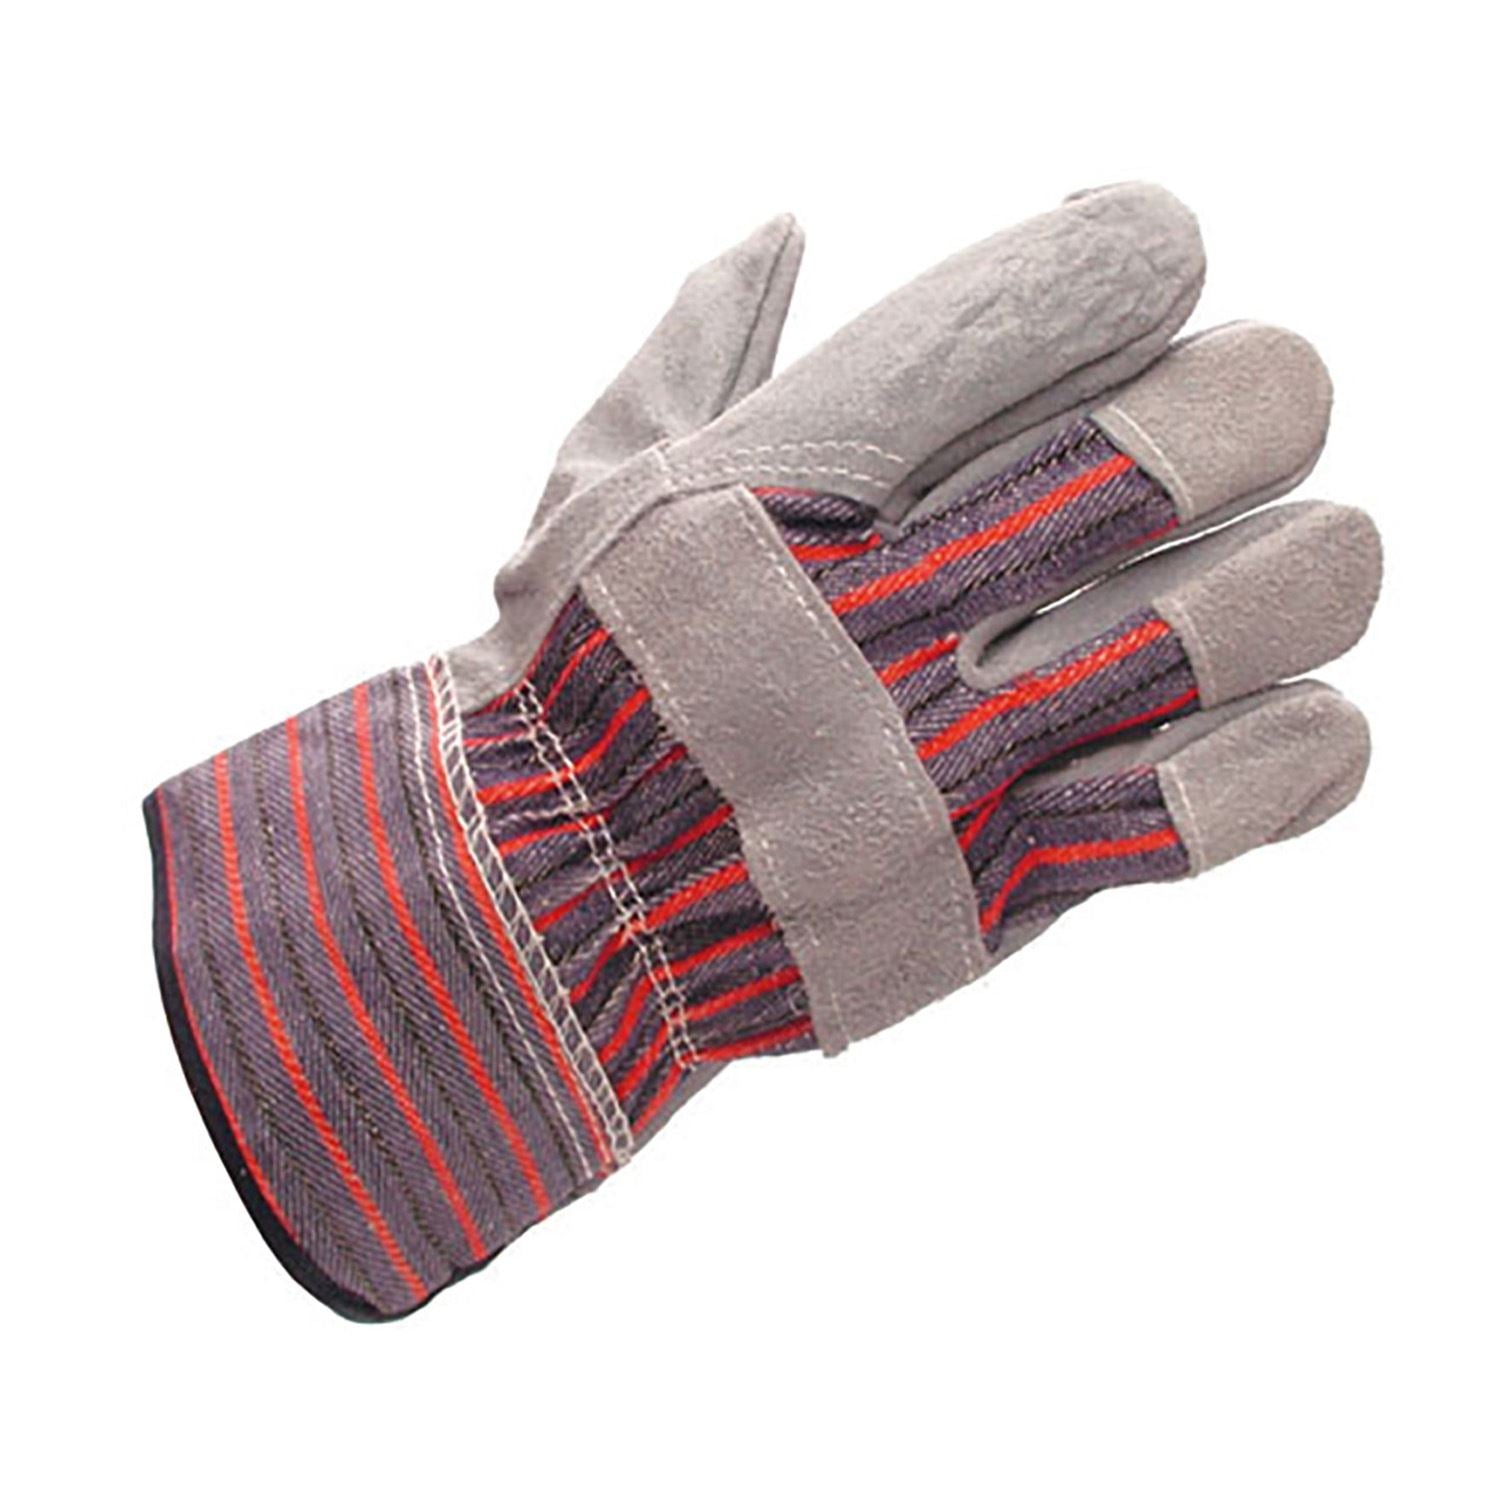 Trilanco Gloves Riggers - Just Horse Riders